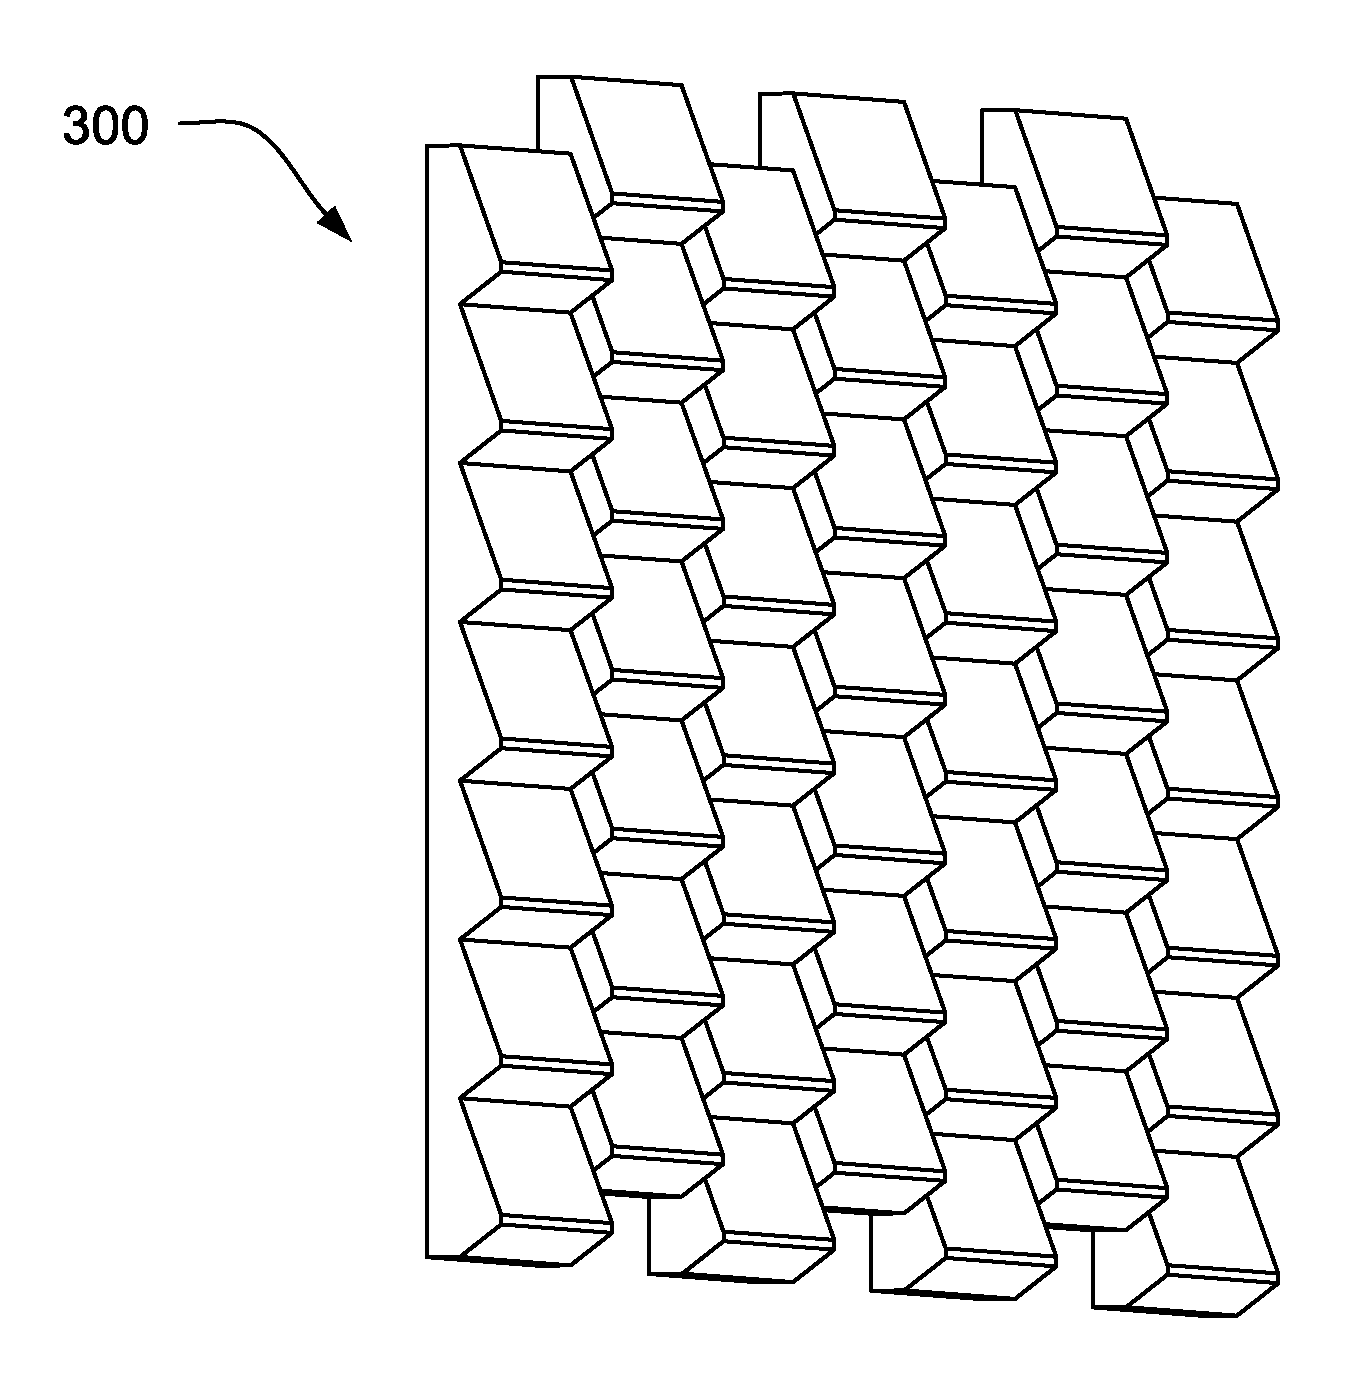 Photovoltaic systems and associated components that are used on buildings and/or associated methods